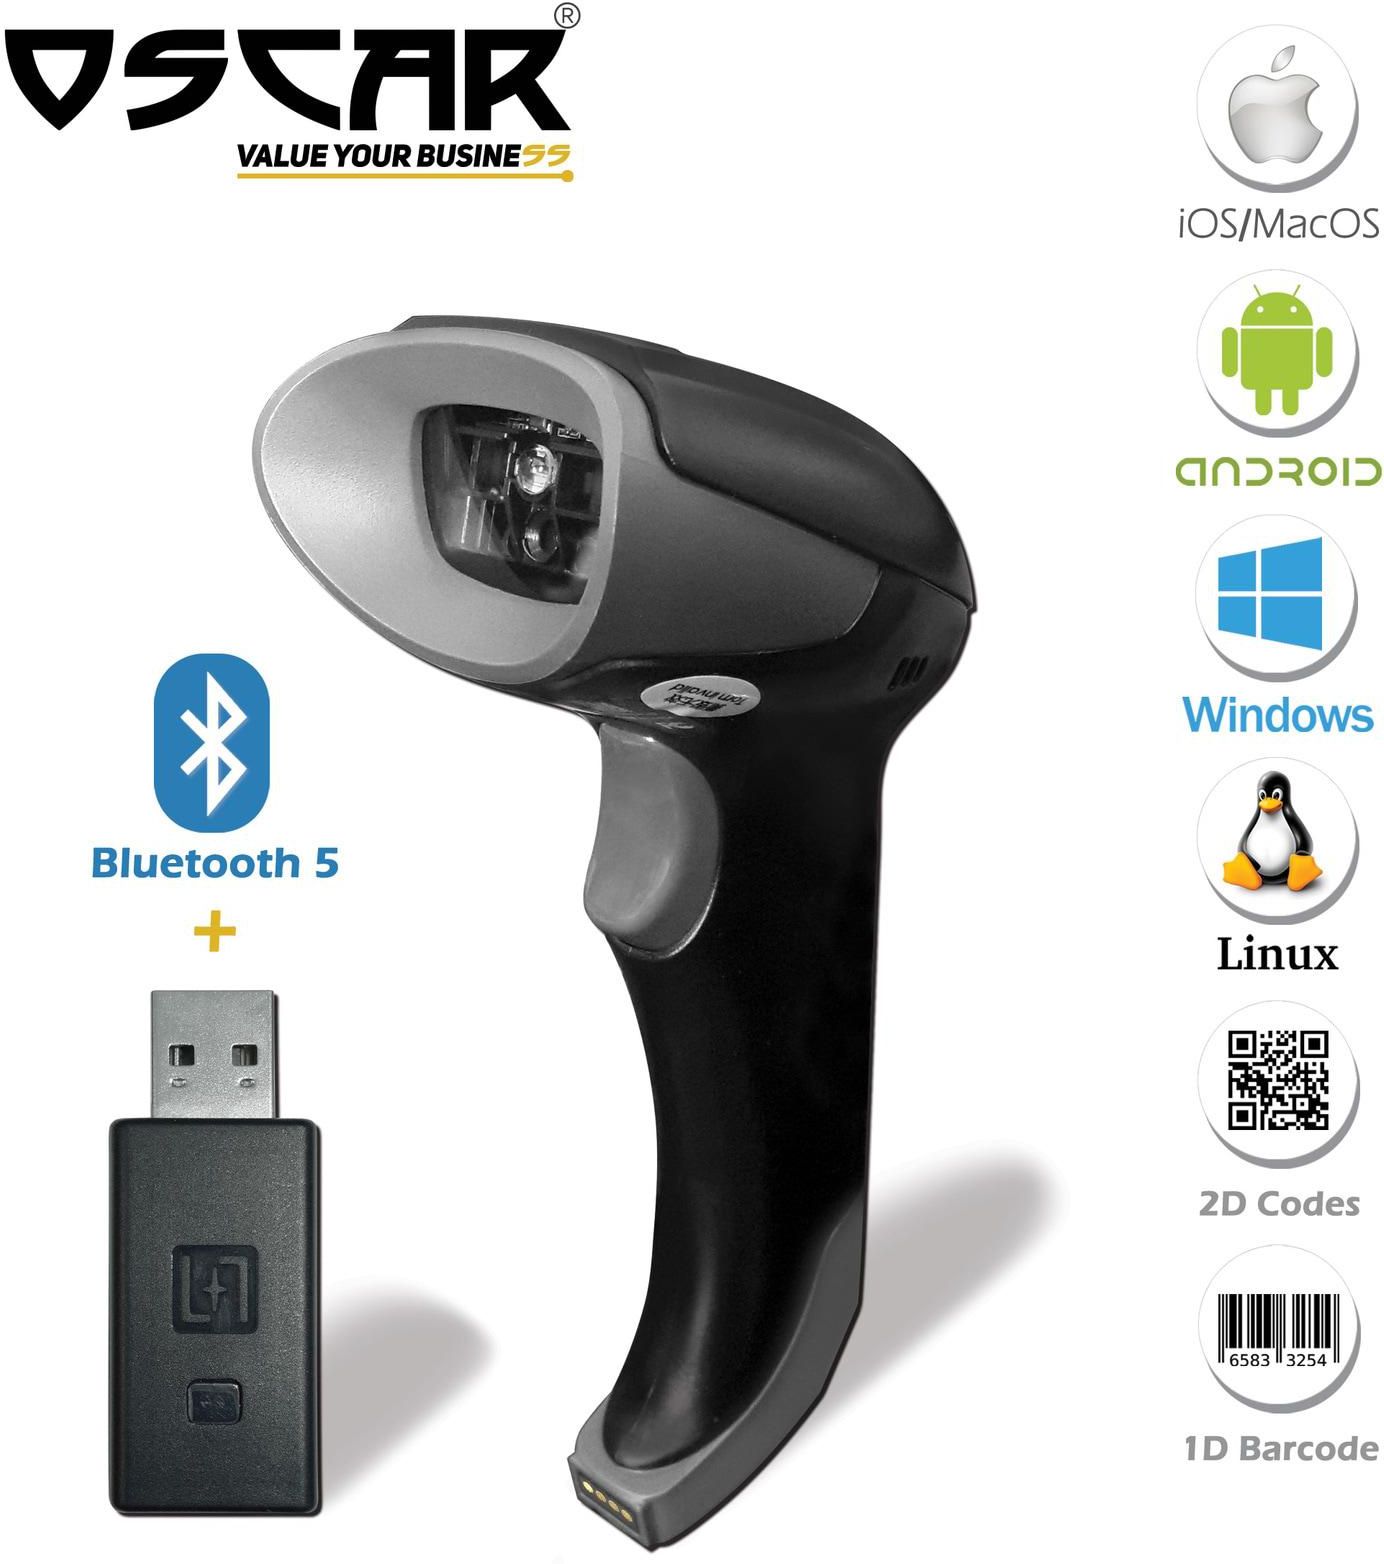 OSCAR UniBar II BT 3 In 1 Wireless Bluetooth 5.0 Wired  20000 Memory  Android IOS MacOS Windows  2D 1D QRCode Barcode Scanner  Scans QR Code From Mobile Phone  USB Dongle Bluetooth Wired